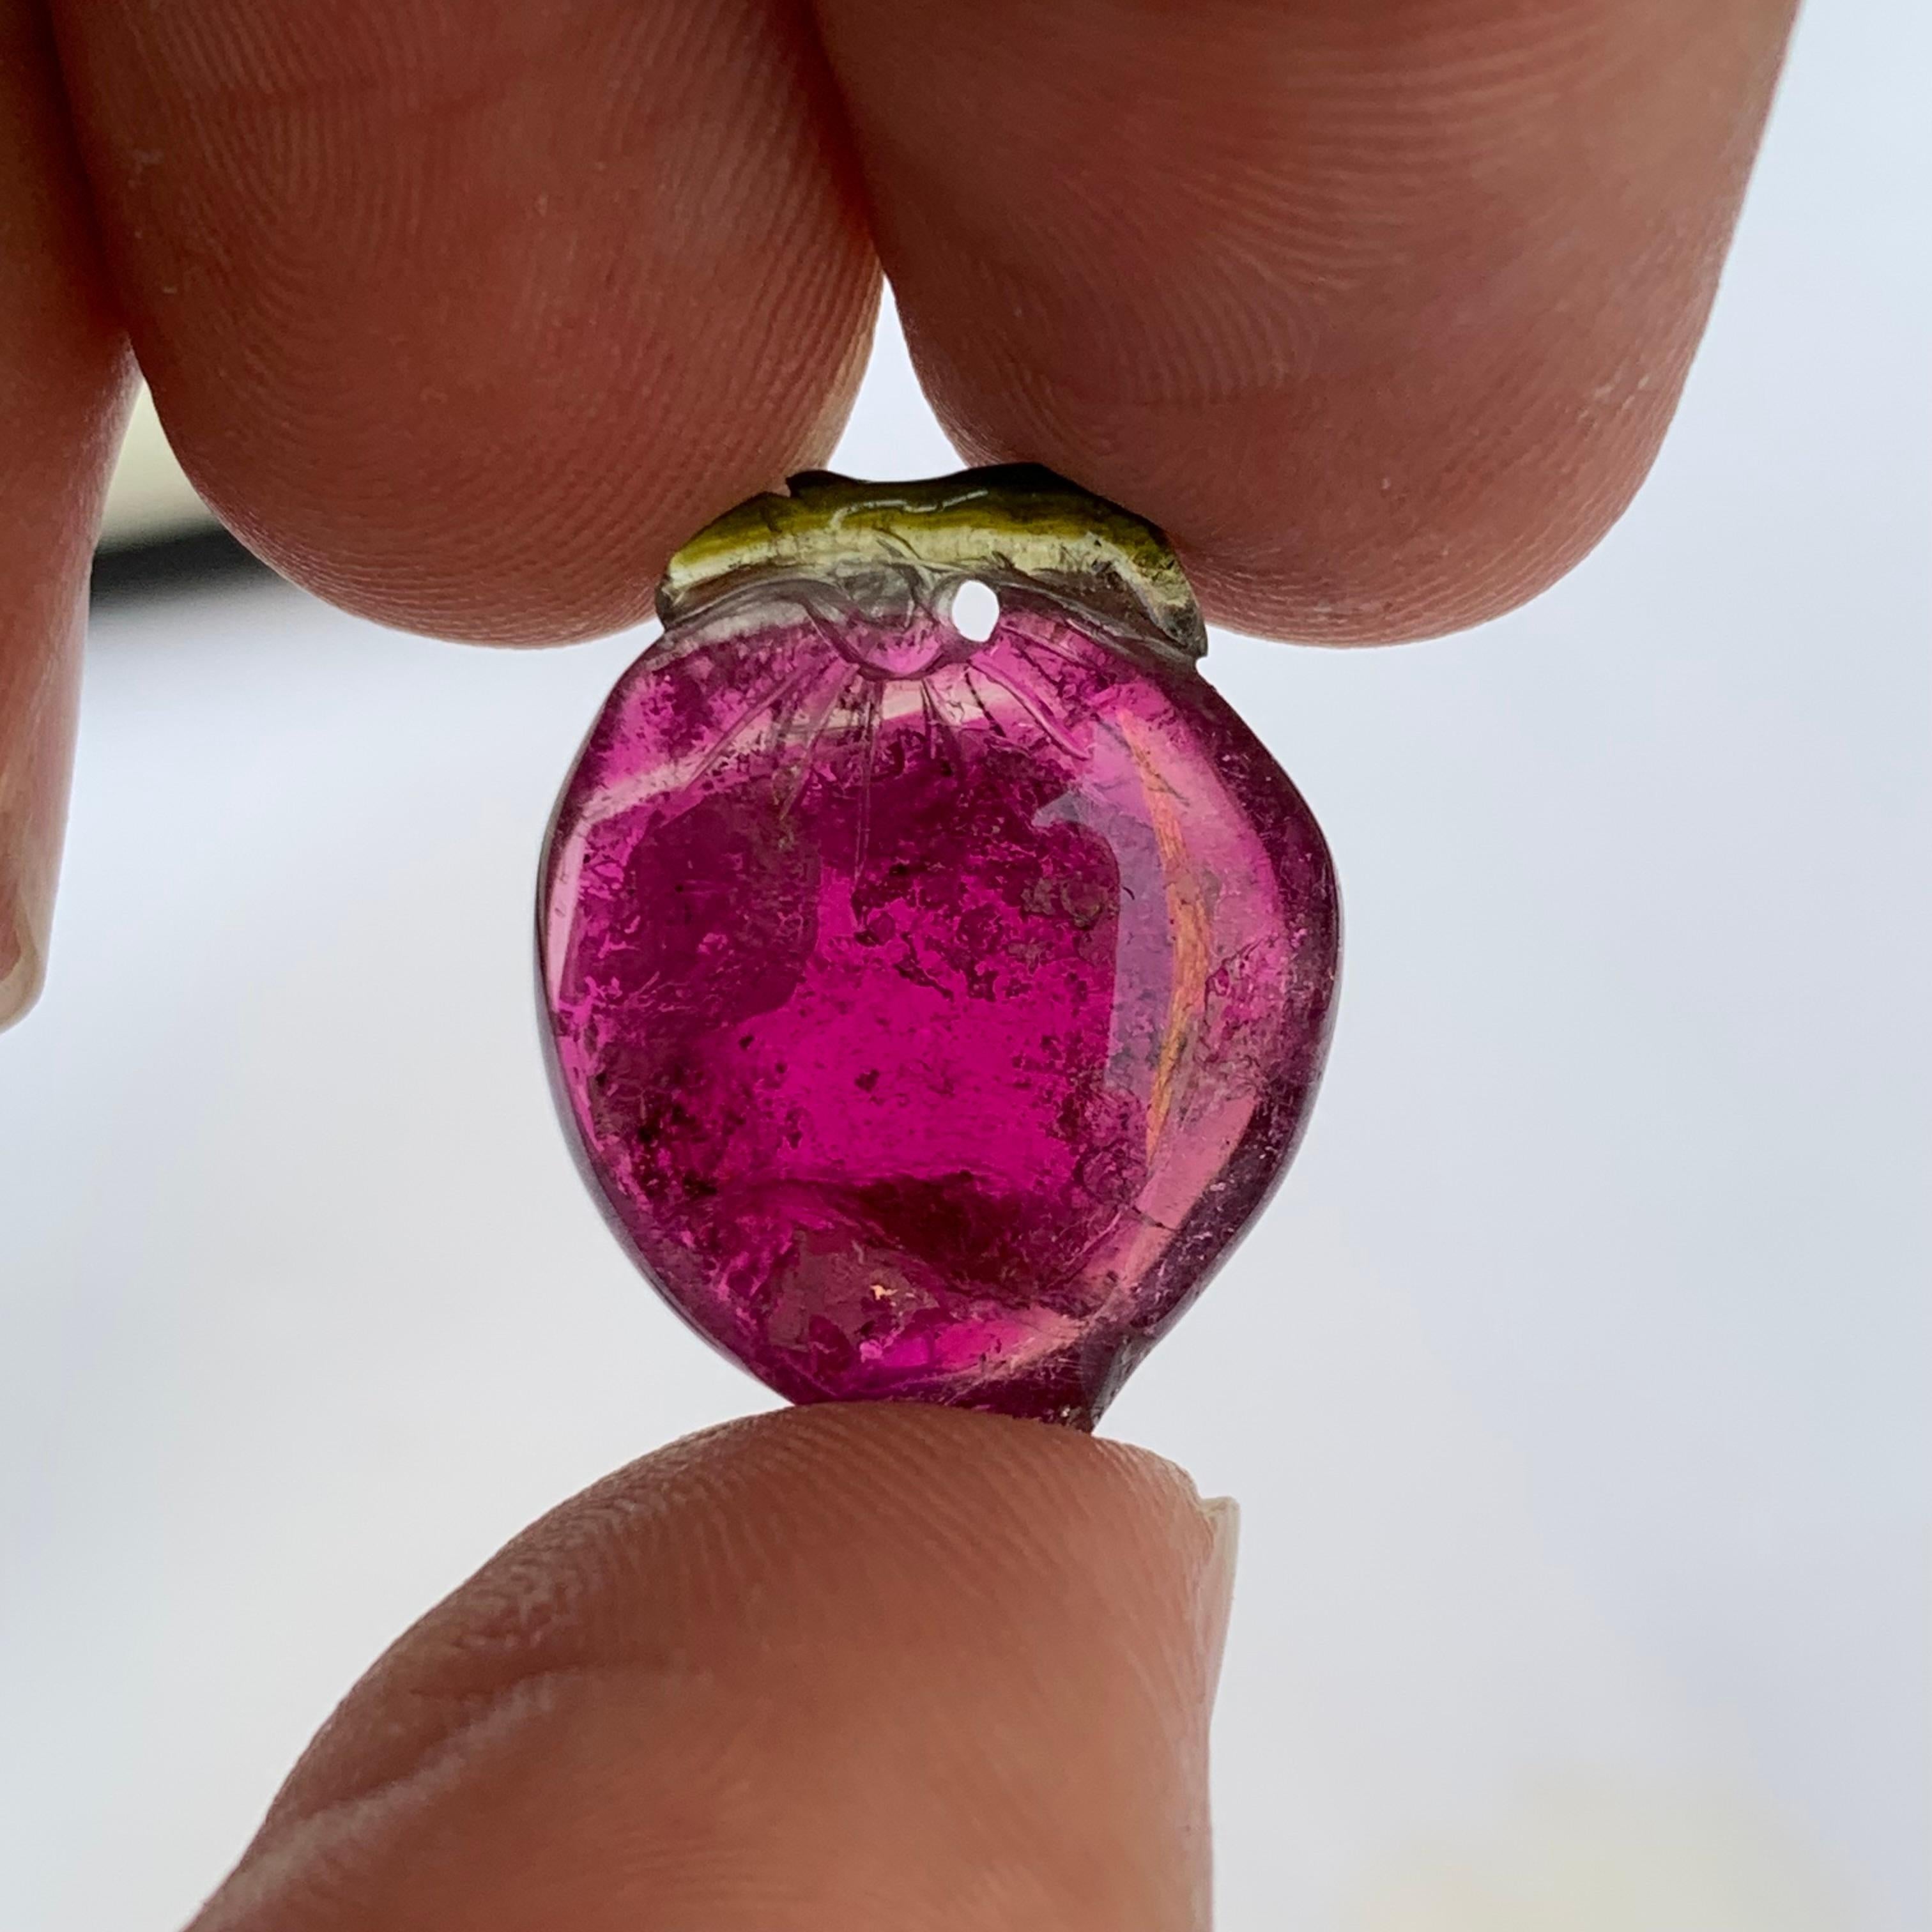 Lovely Faceted Strawberry Shape Watermelon Tourmaline Drilled Carving From Africa
WEIGHT: 14.50 Carat
DIMENSIONS: 1.98 x 1.64 x 0.63 Cm
ORIGIN: Madagascar, Africa
Shape: Strawberry 
Type : Carving
TREATMENT: None

Tourmaline is an extremely